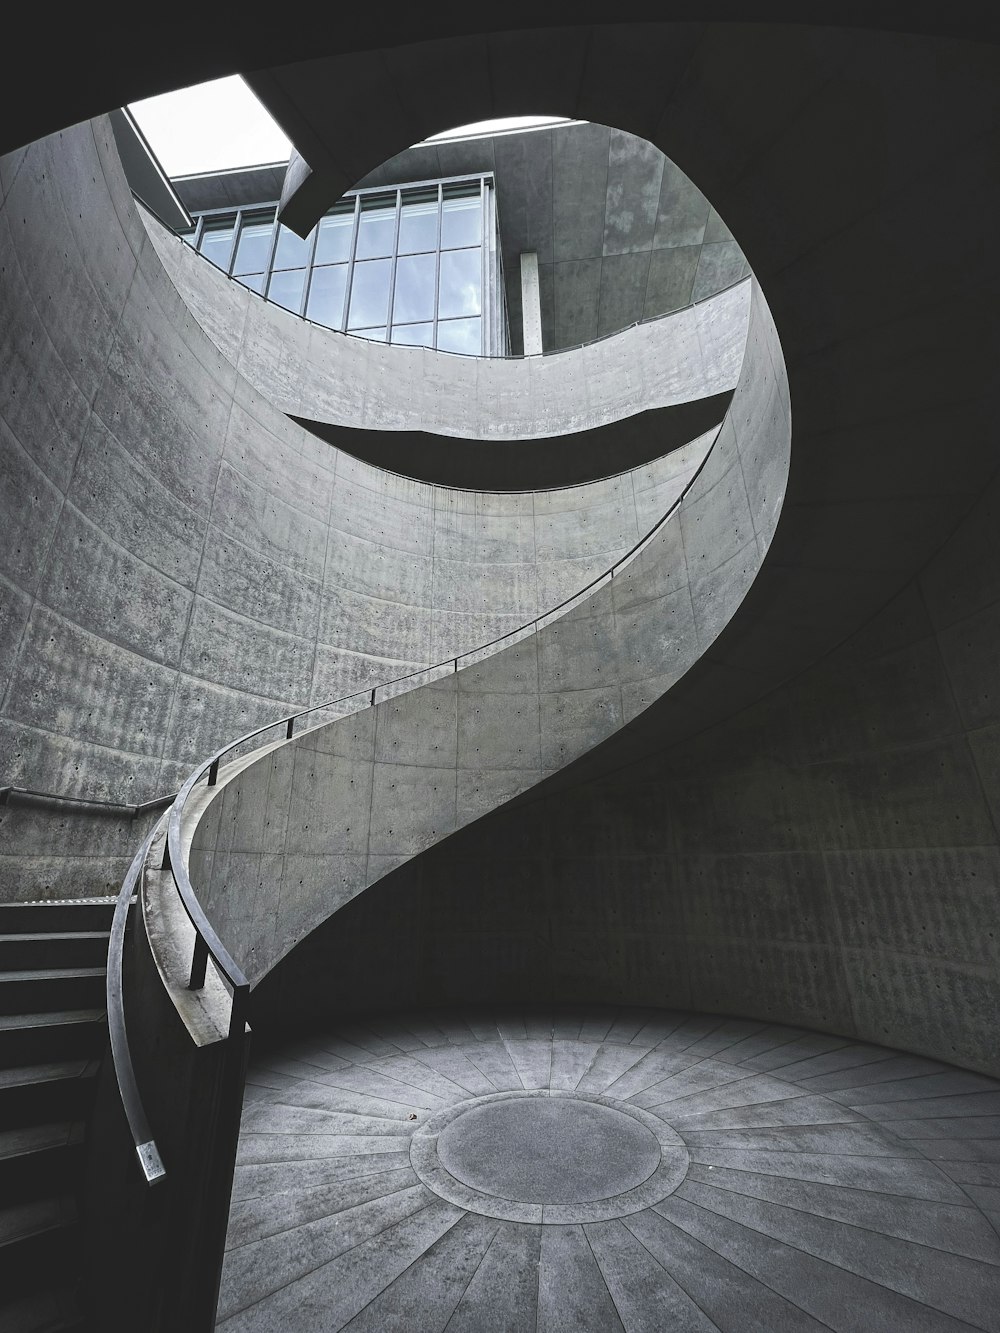 a spiral staircase in a building with a circular window